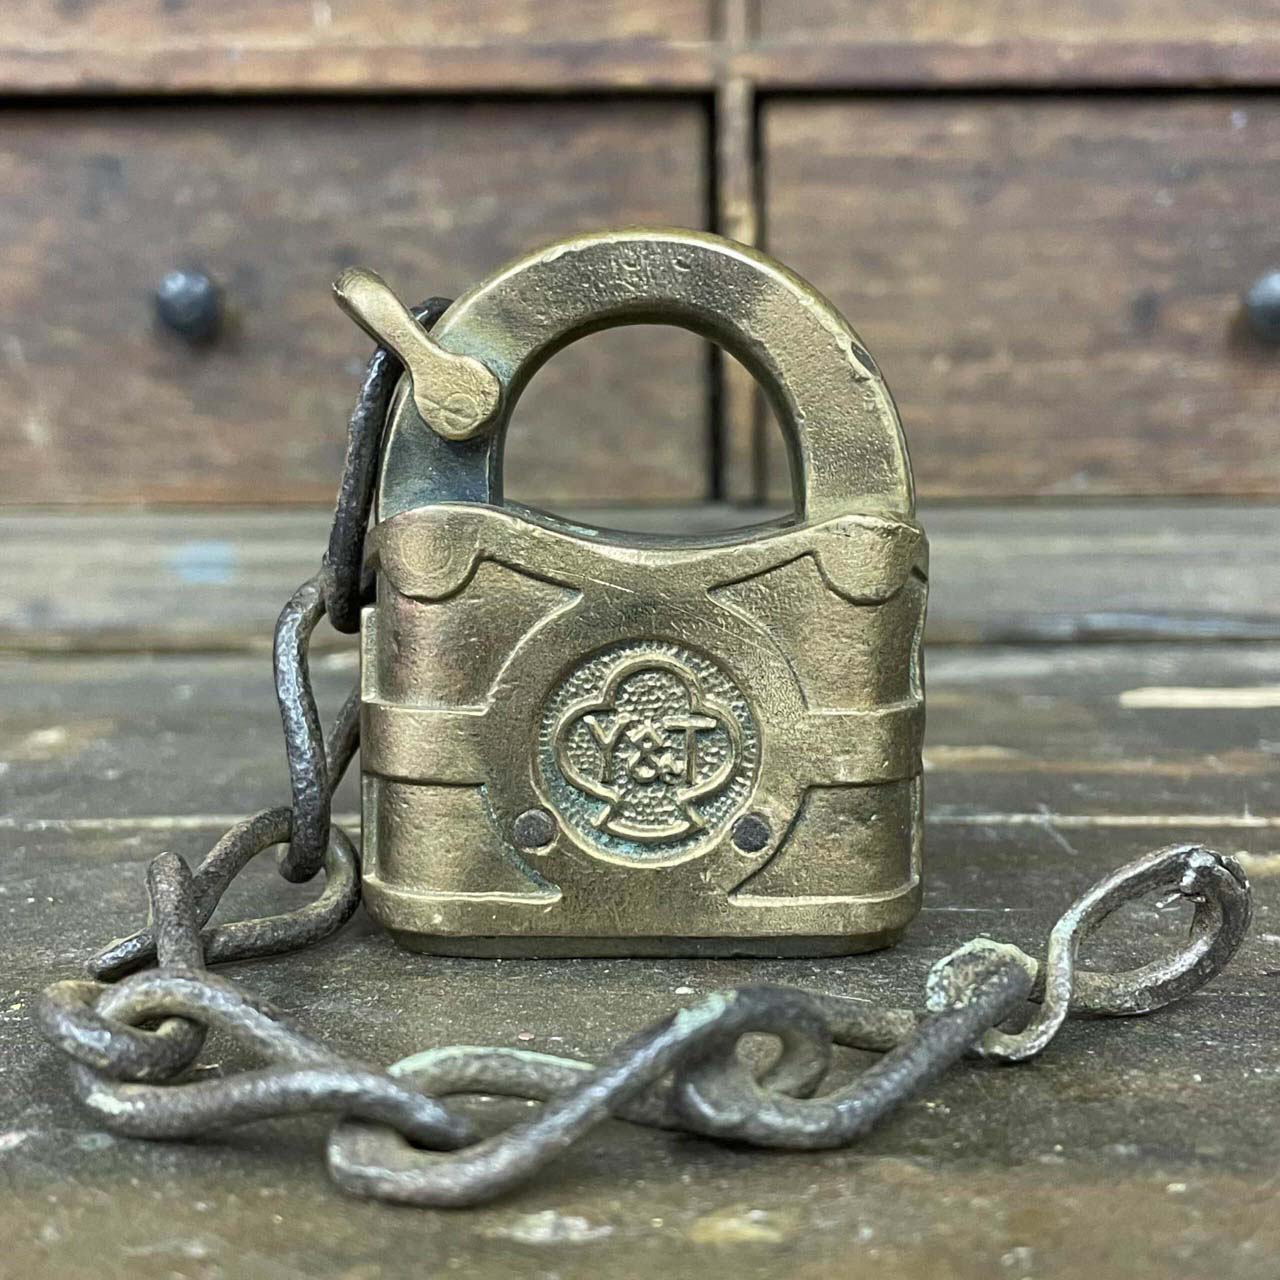 Details about   Vintage Yale & Towne Padlock Y & T  Antique Brass Lock With Key And Chain 